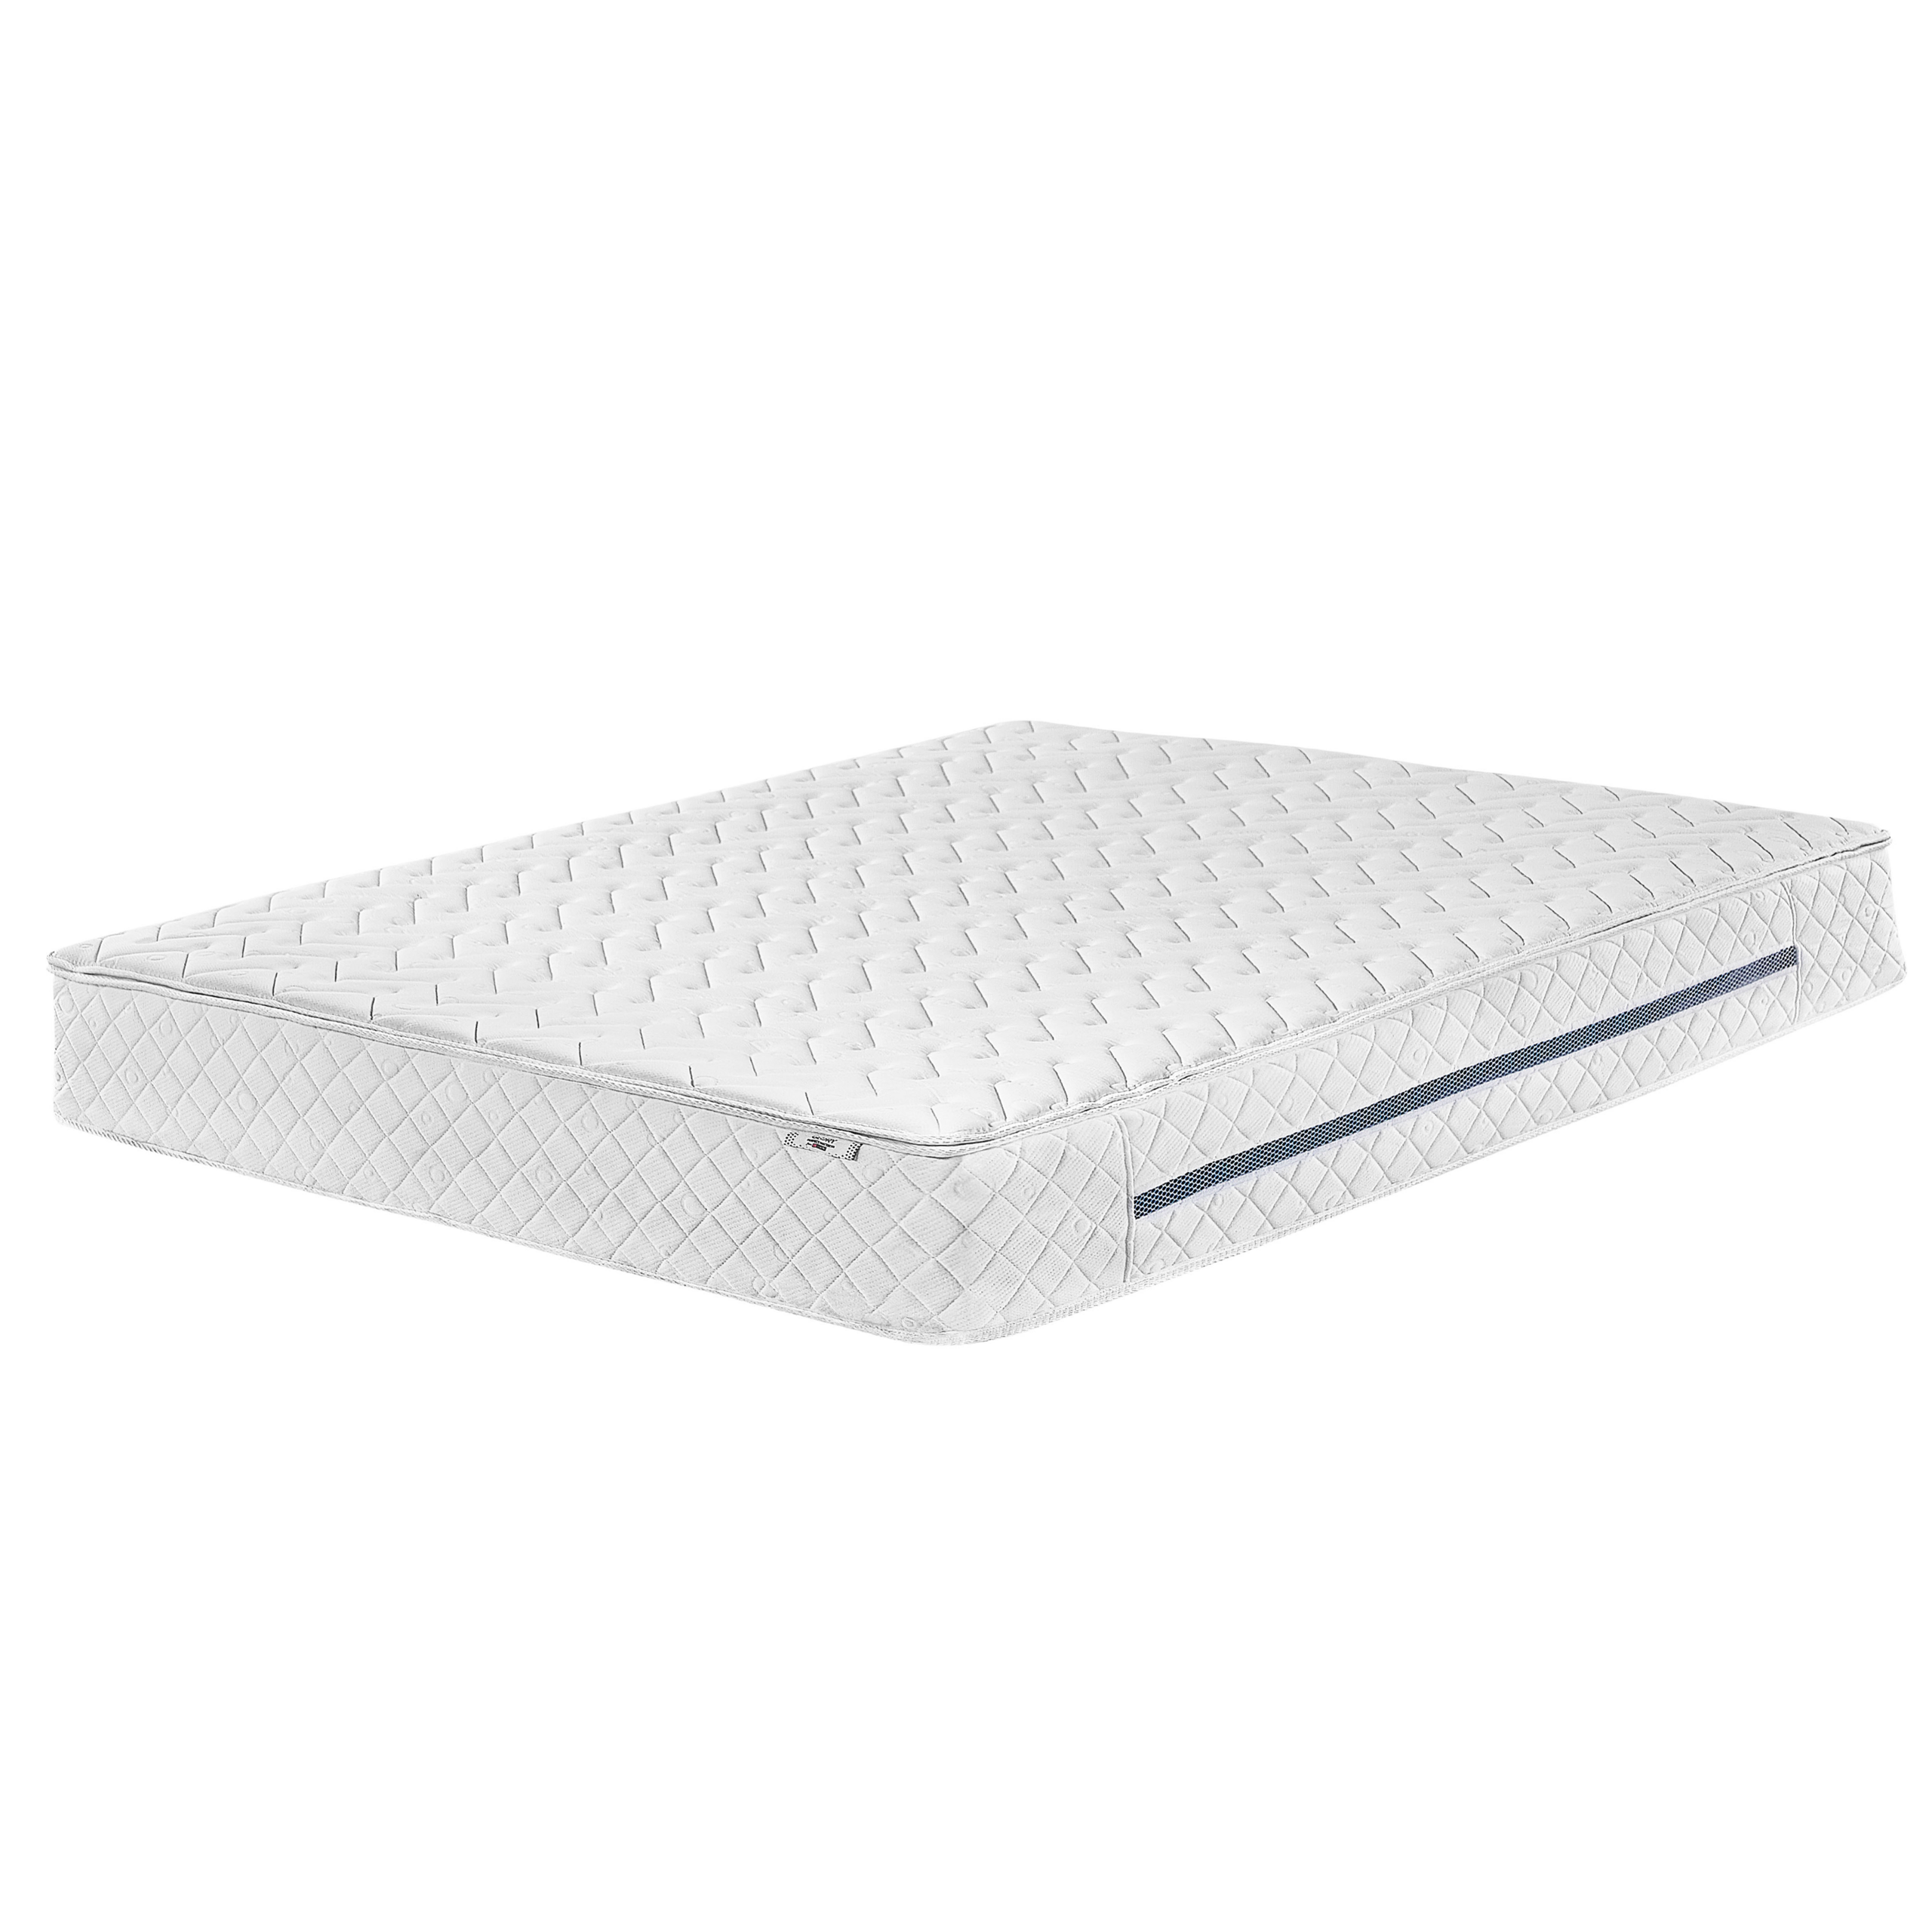 Beliani Pocket Spring Mattress Firm White 180 x 200 cm Polyester with Cooling Memory Foam with Zip